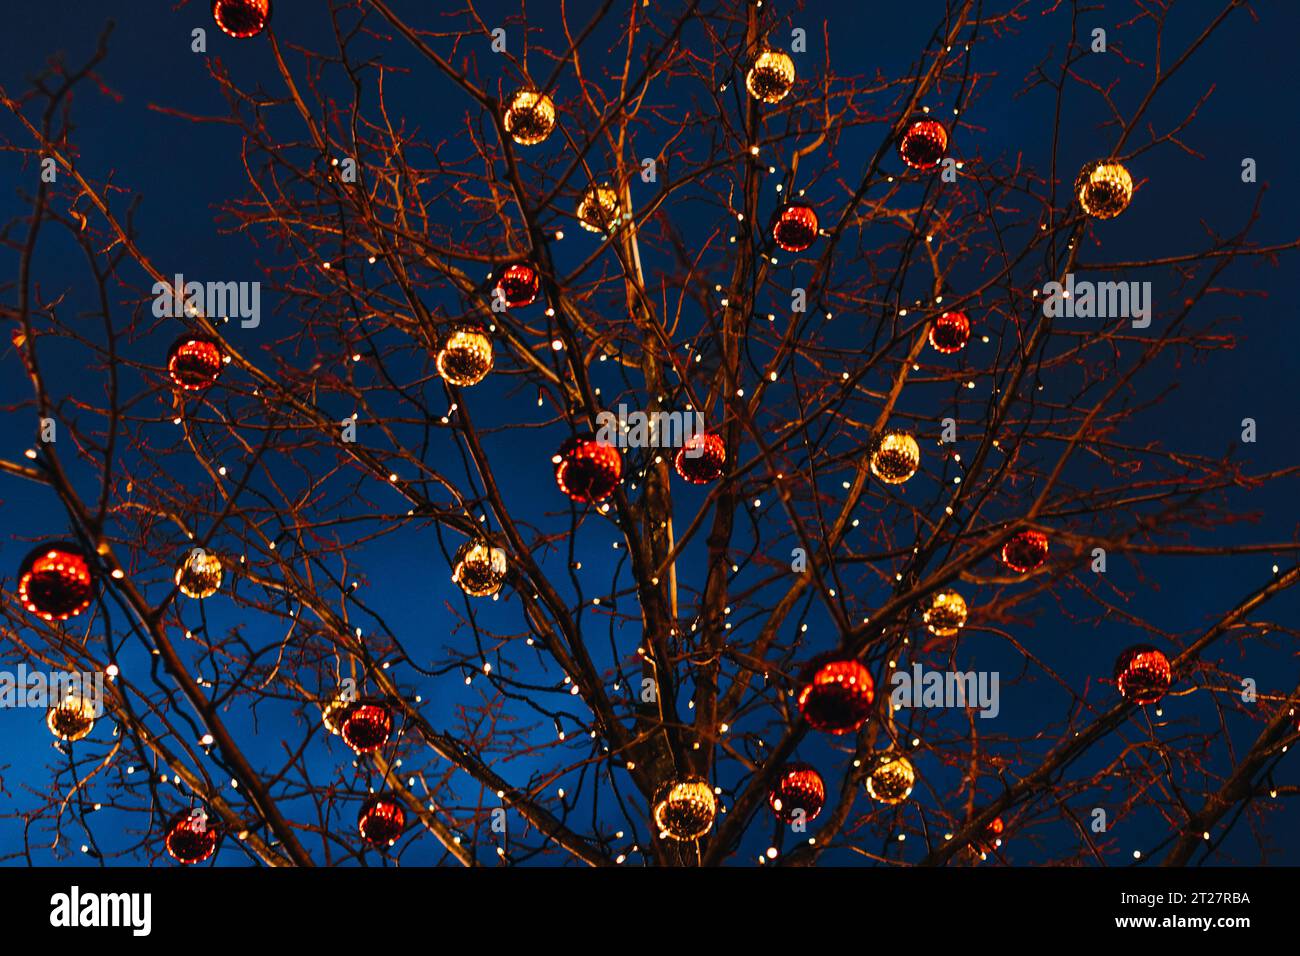 Tree branches decorated with red and golden Christmas glittering balls. New Year's outdoor festive decorations against a blue night sky. Magic wallpap Stock Photo